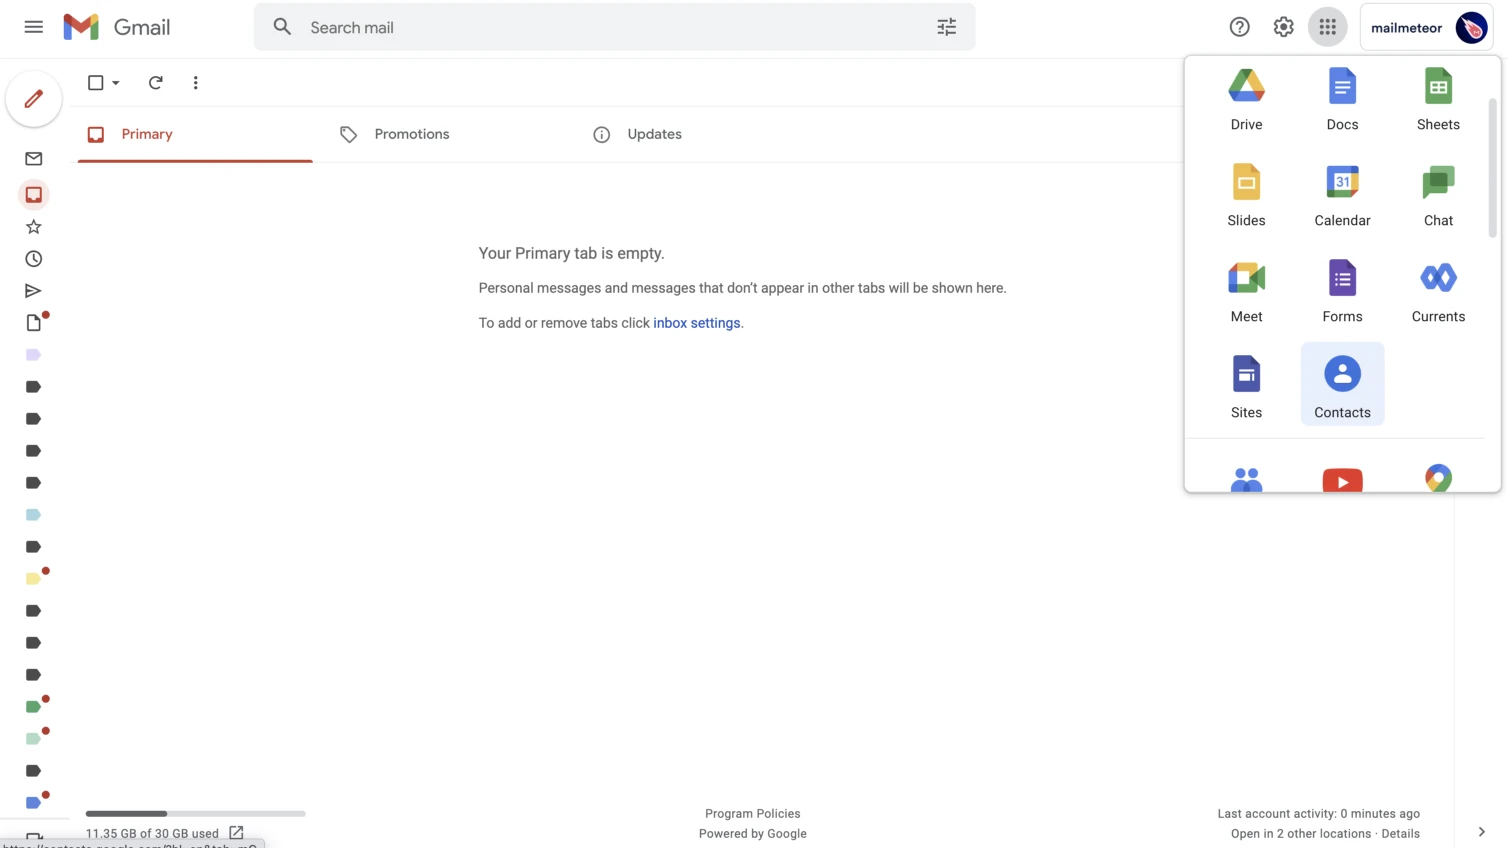 Gmail's inbox quick access to Google Apps